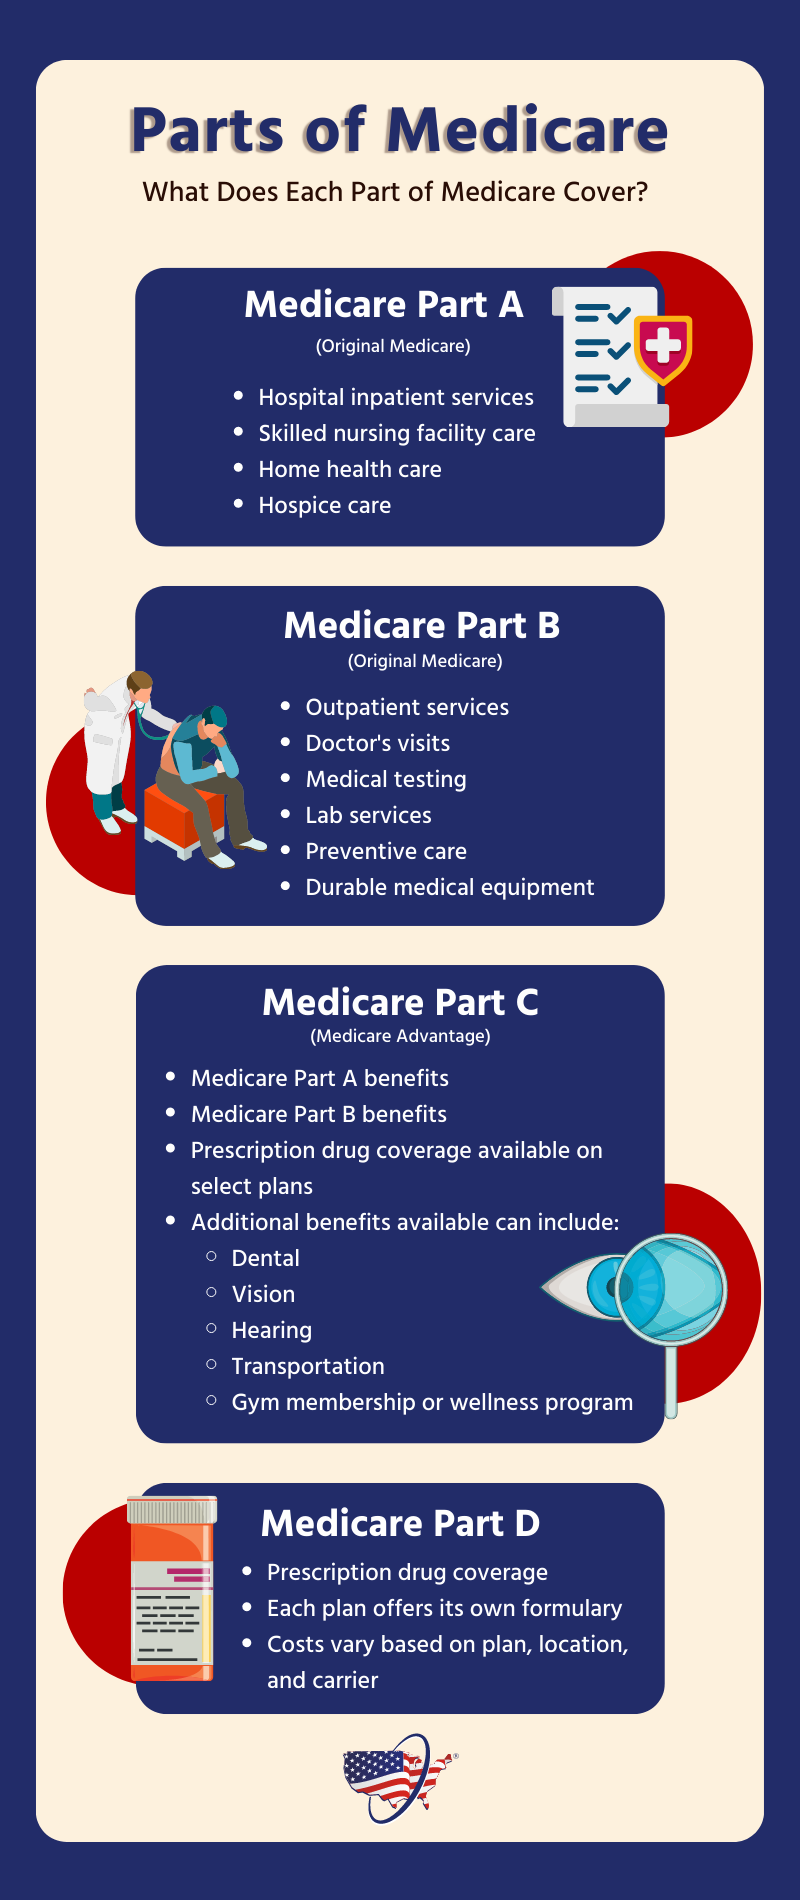 Learn about the four parts of Medicare: Medicare Part A, Part B, Part C, and Part D.